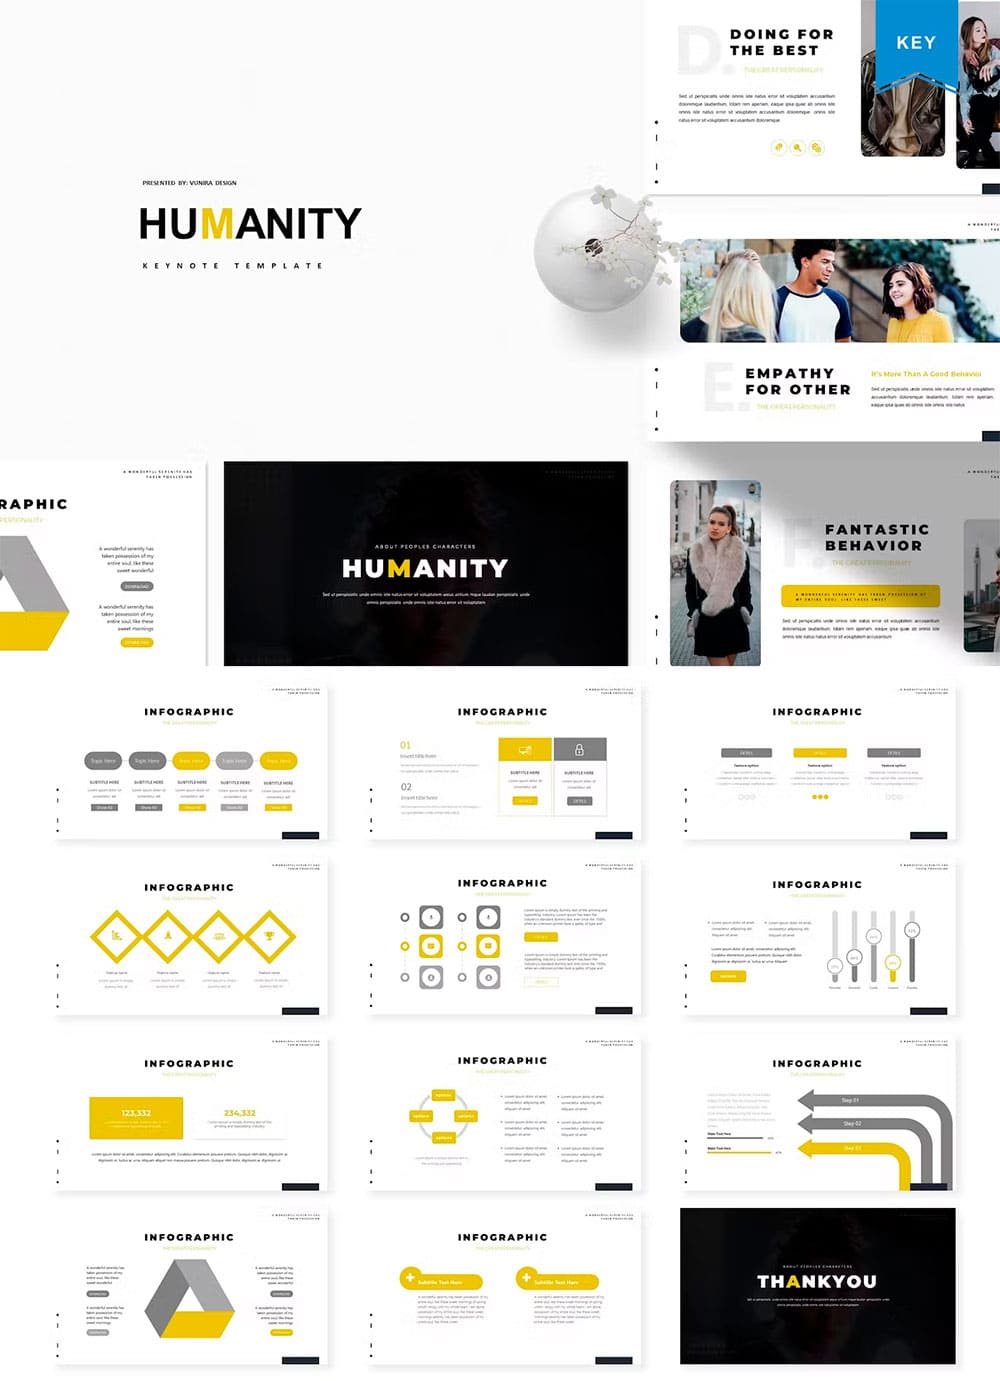 Humanity keynote template, picture for pinterest.